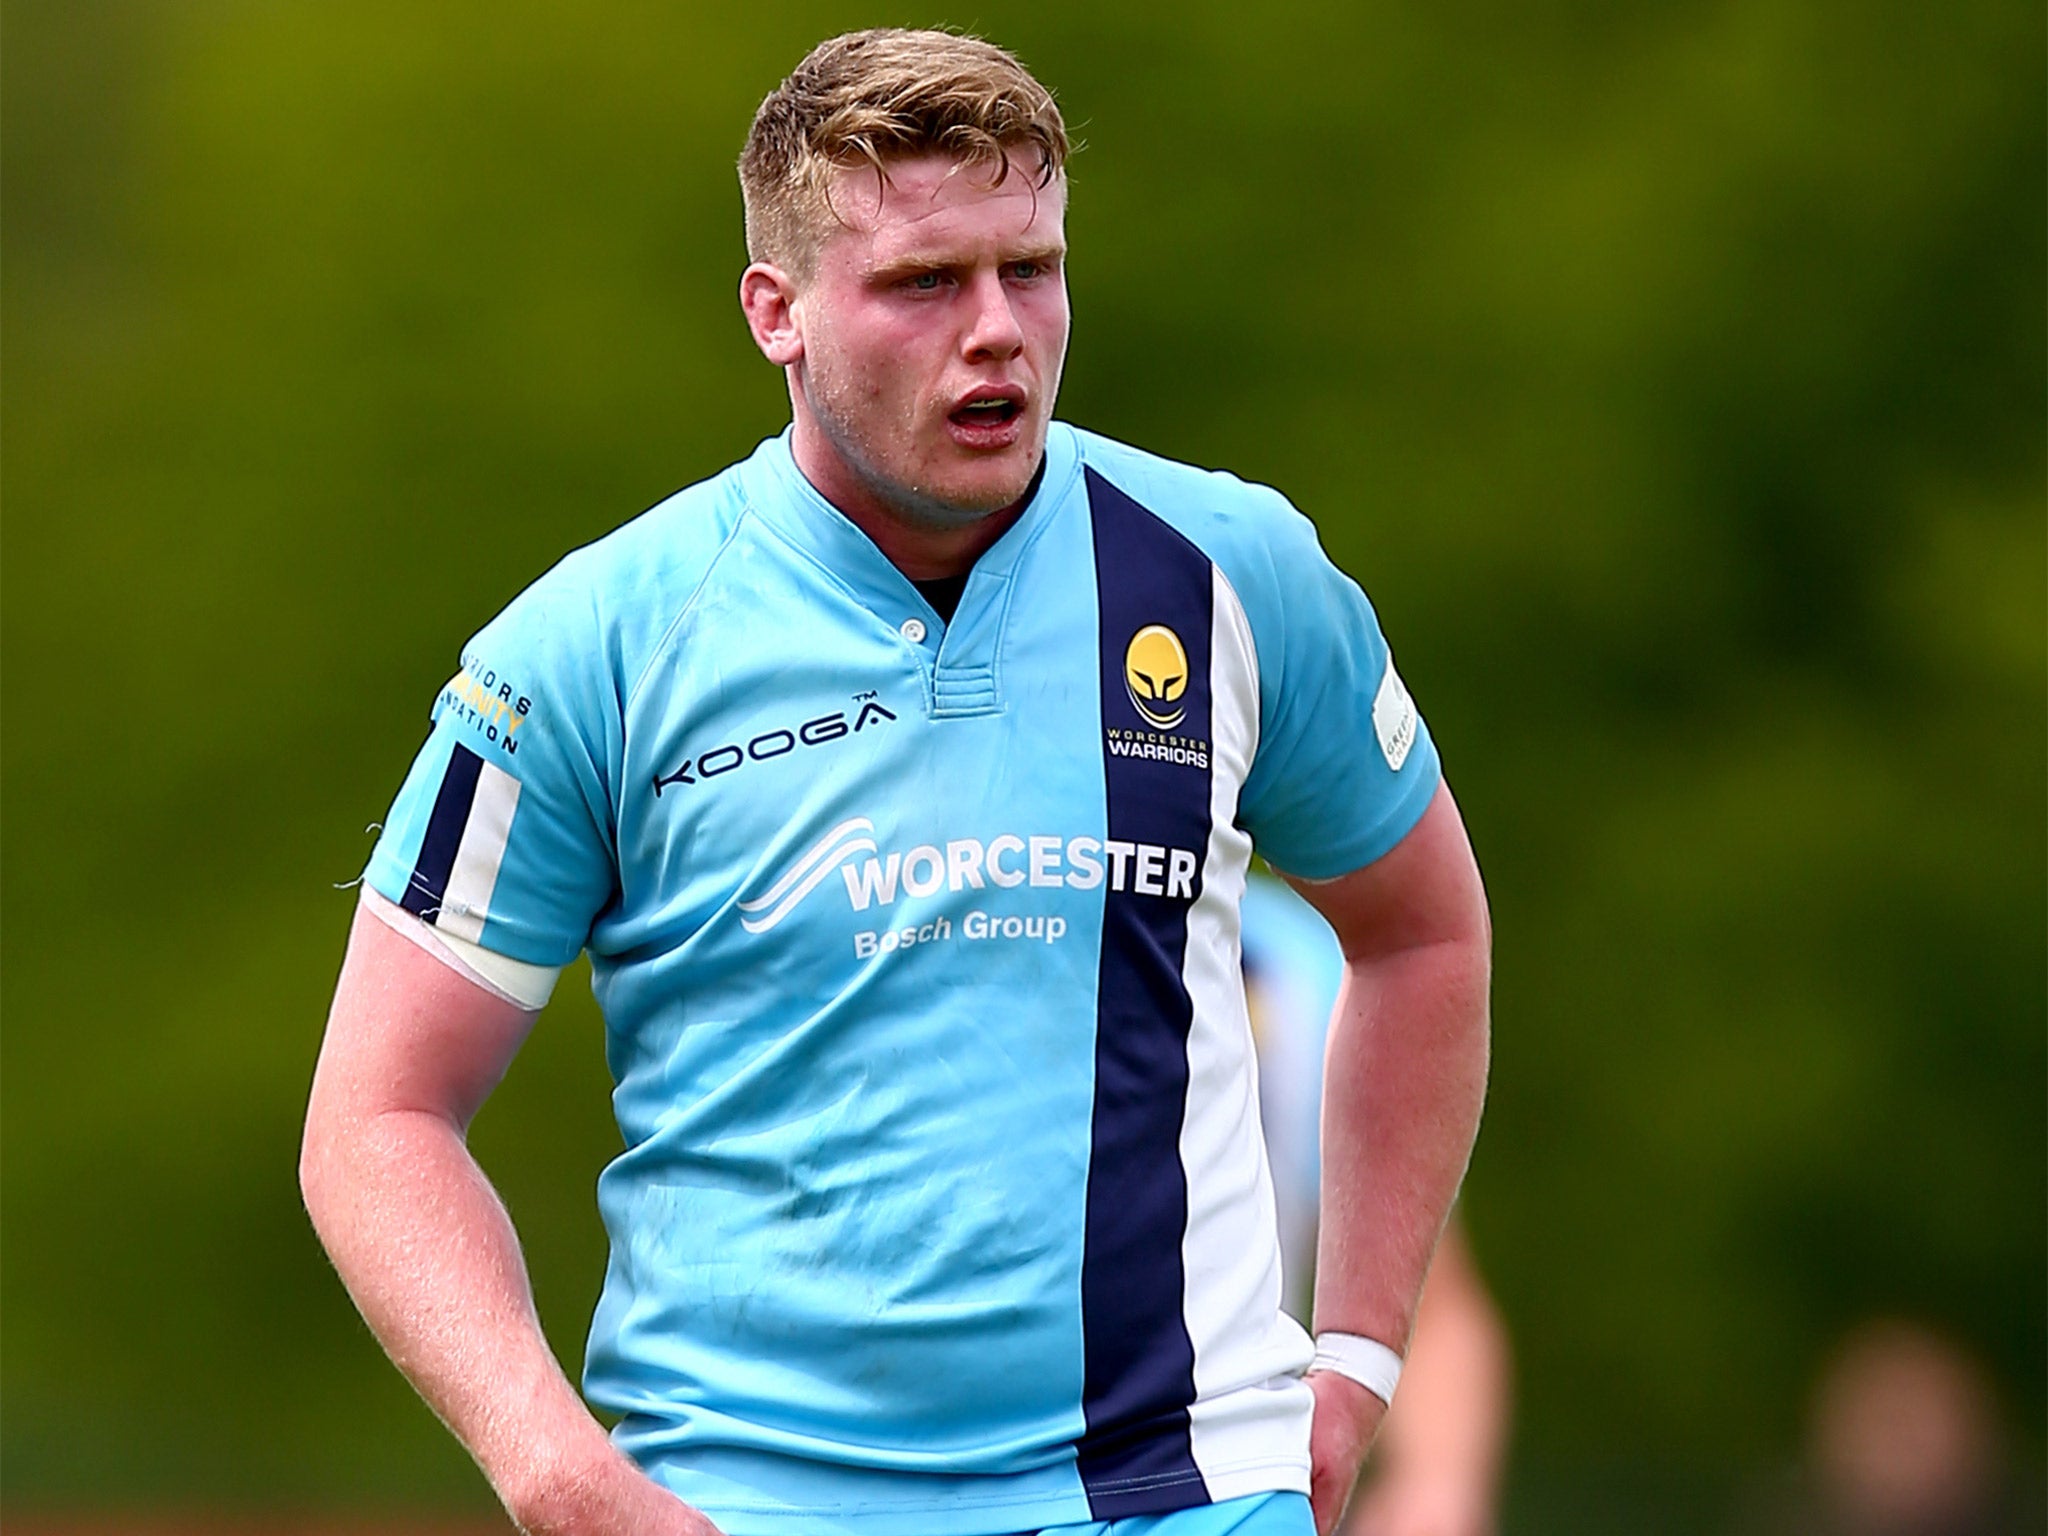 Niall Annett's late try gave Worcester the win